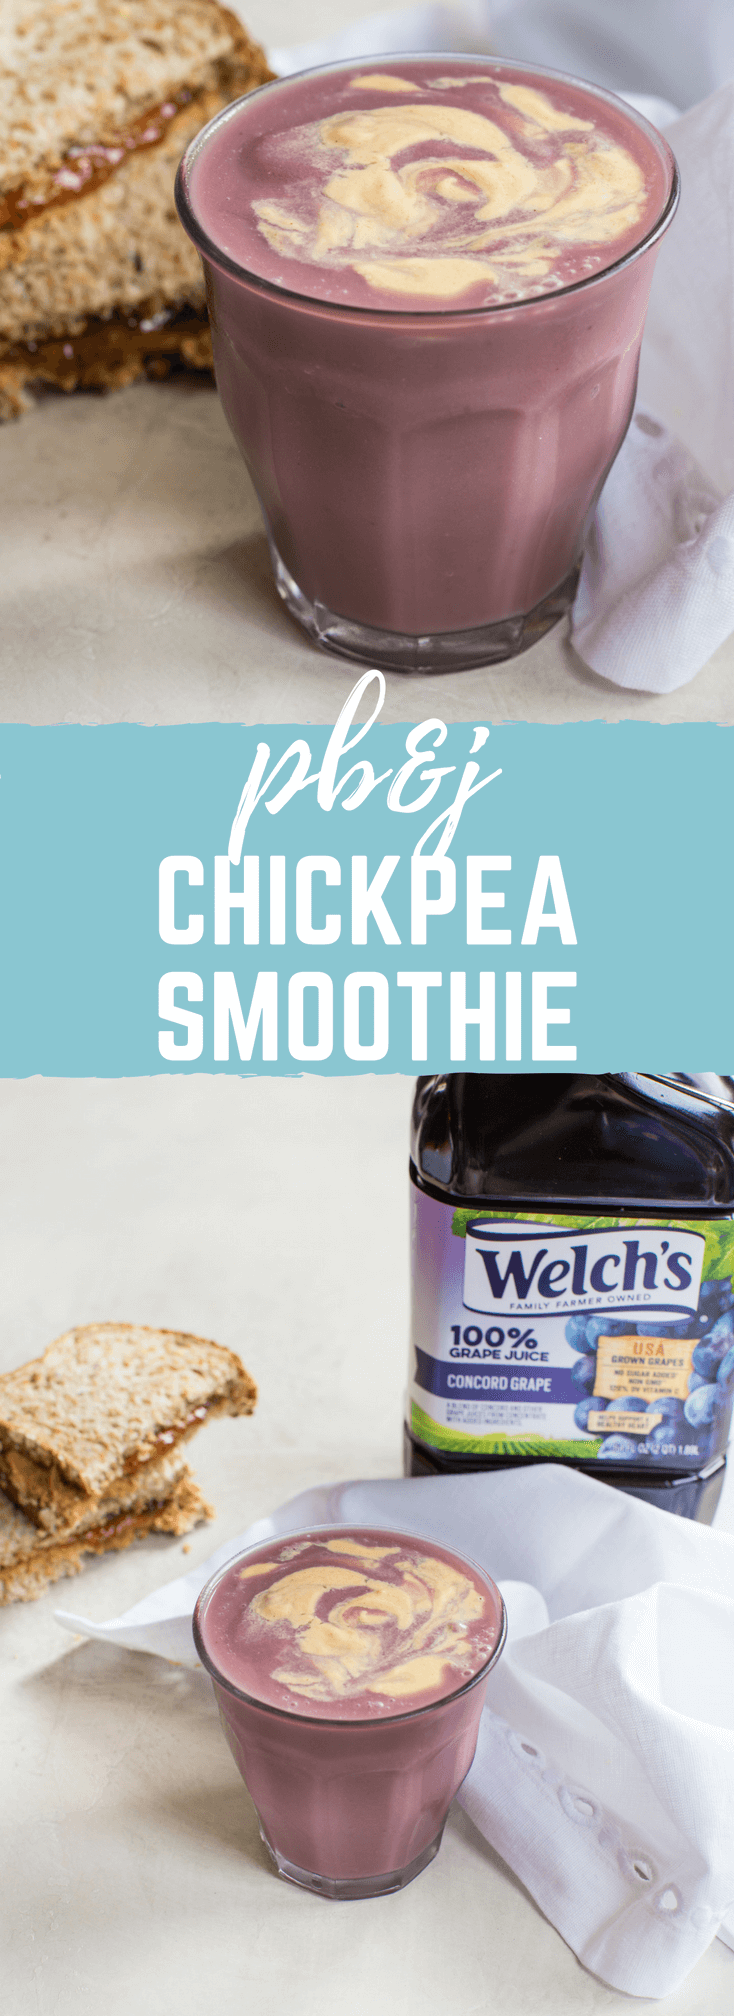 PB&J Chickpea Smoothie, a vegan protein shake that takes you back to your childhood. We love this recipe because it’s made with 4 whole food ingredients—chickpeas, 100% grape juice, peanut butter, and flax. Gimme.